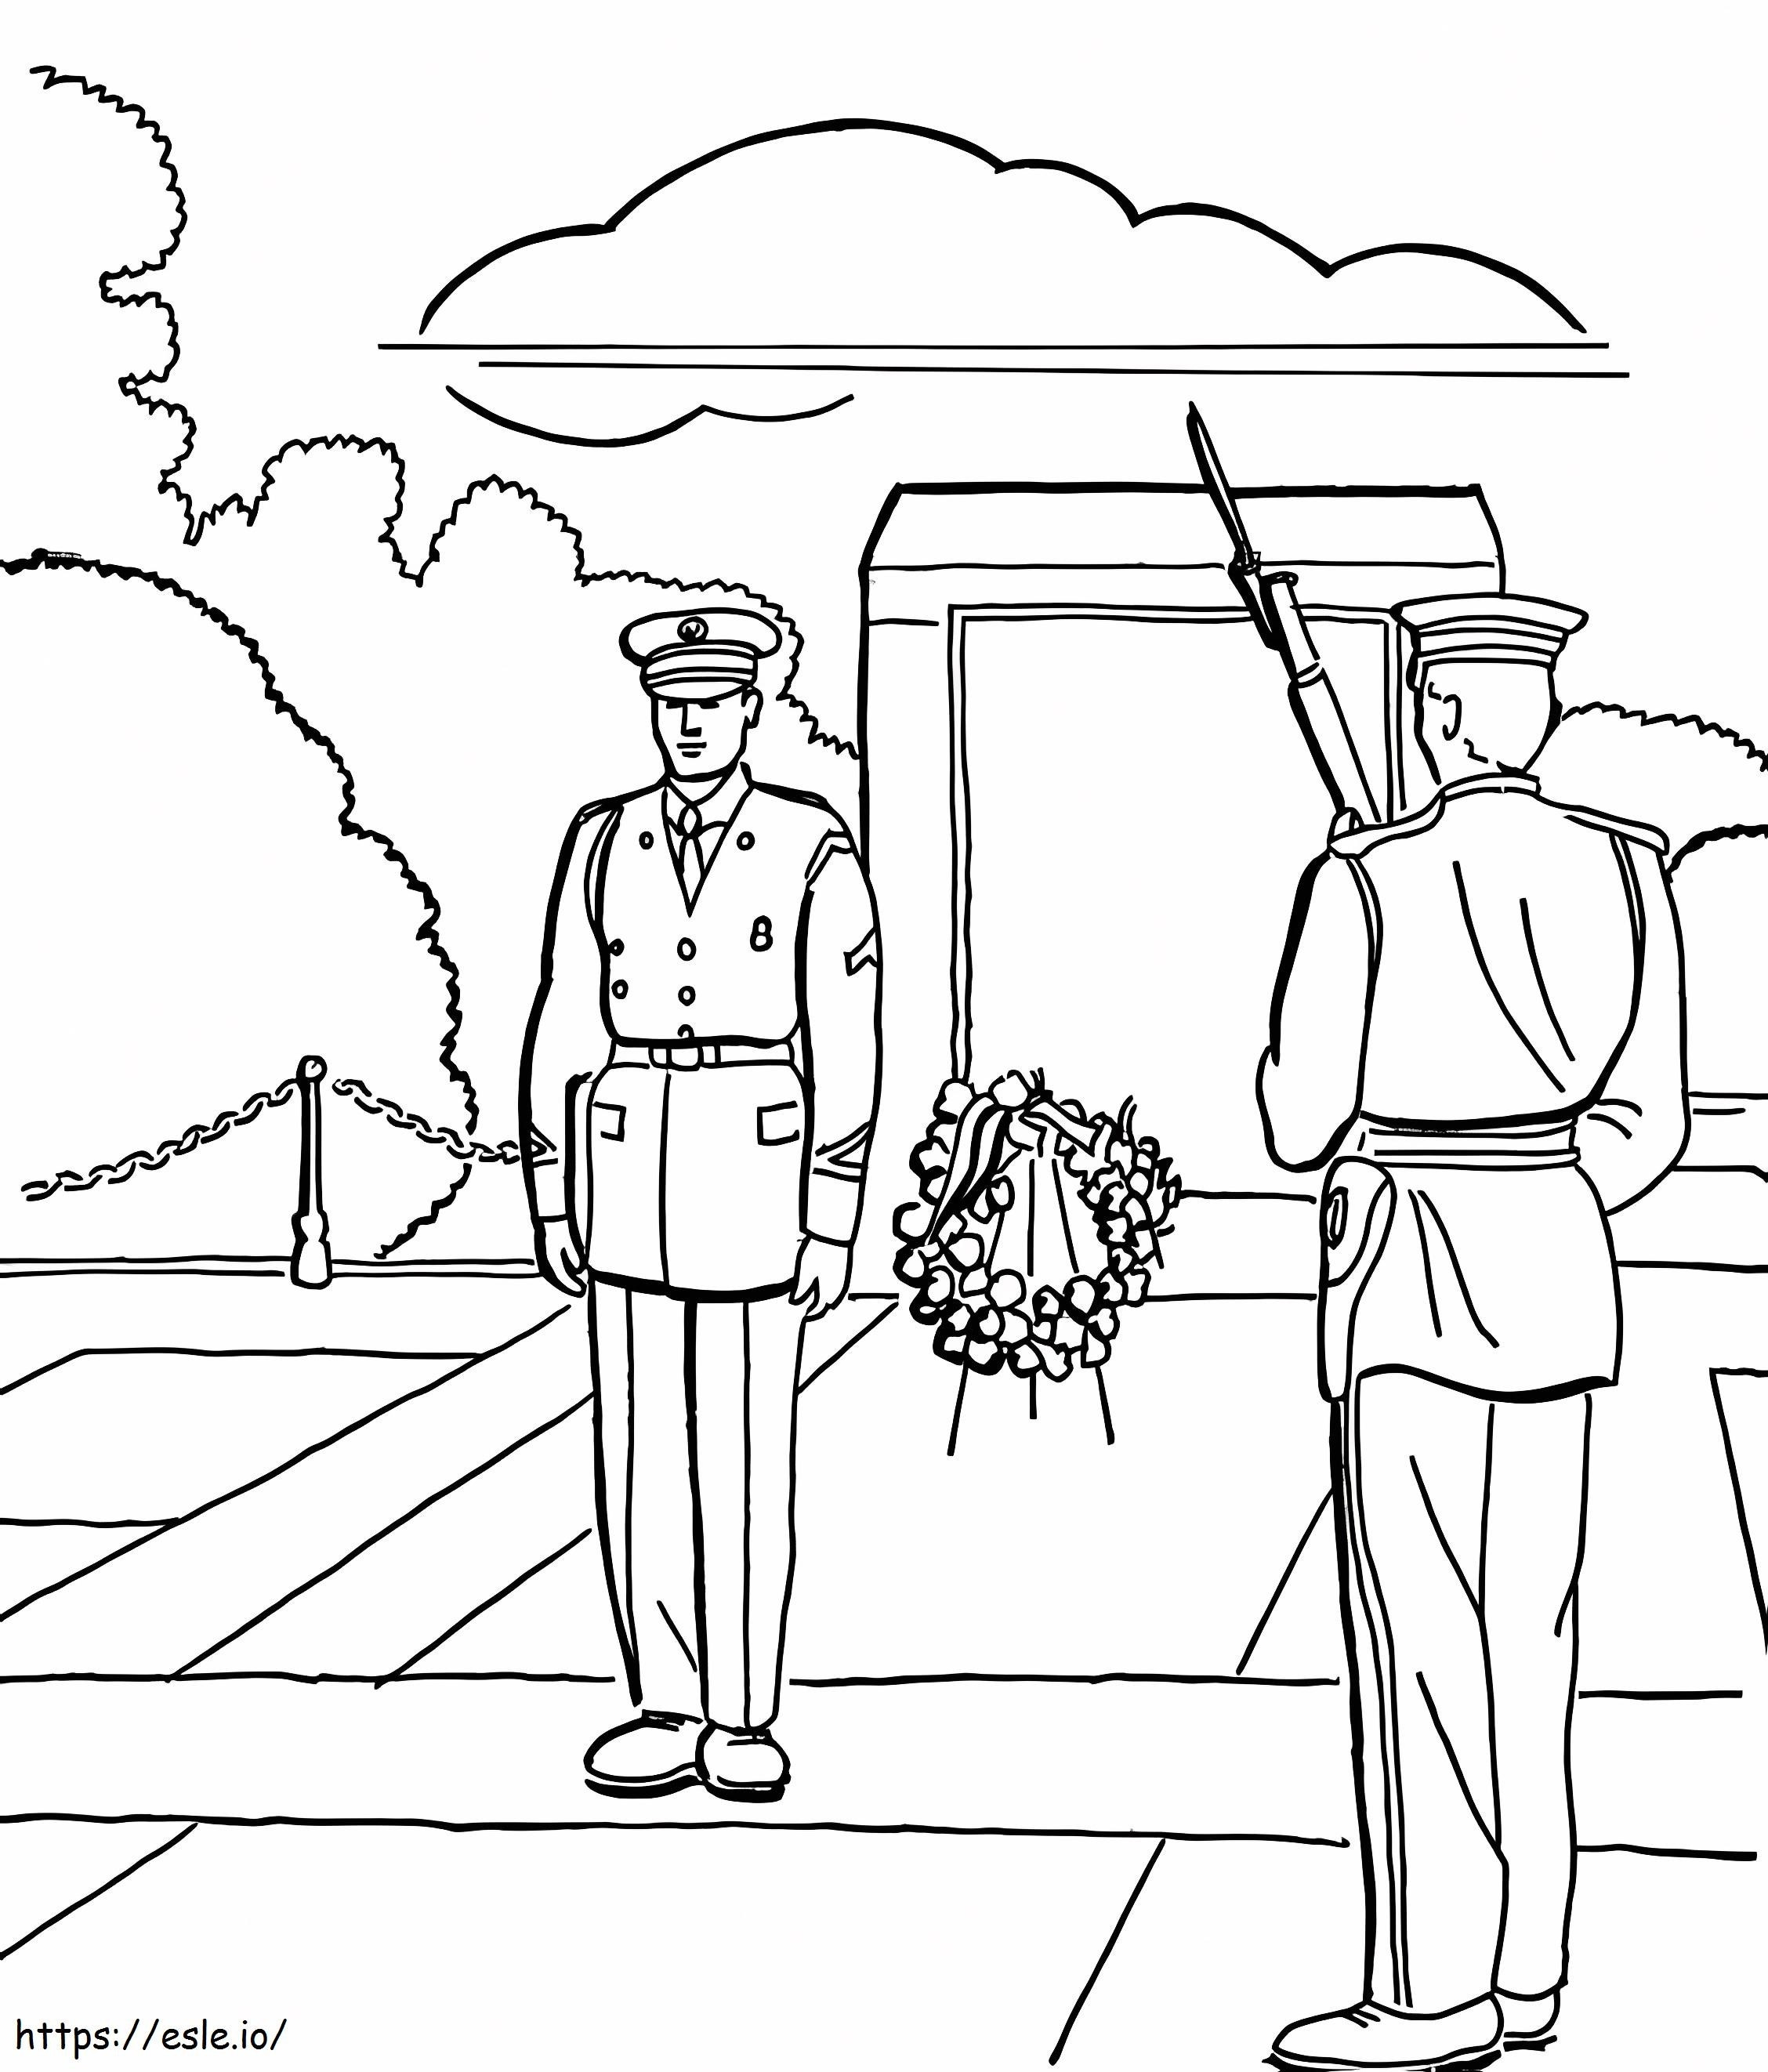 Memorial Day 10 coloring page